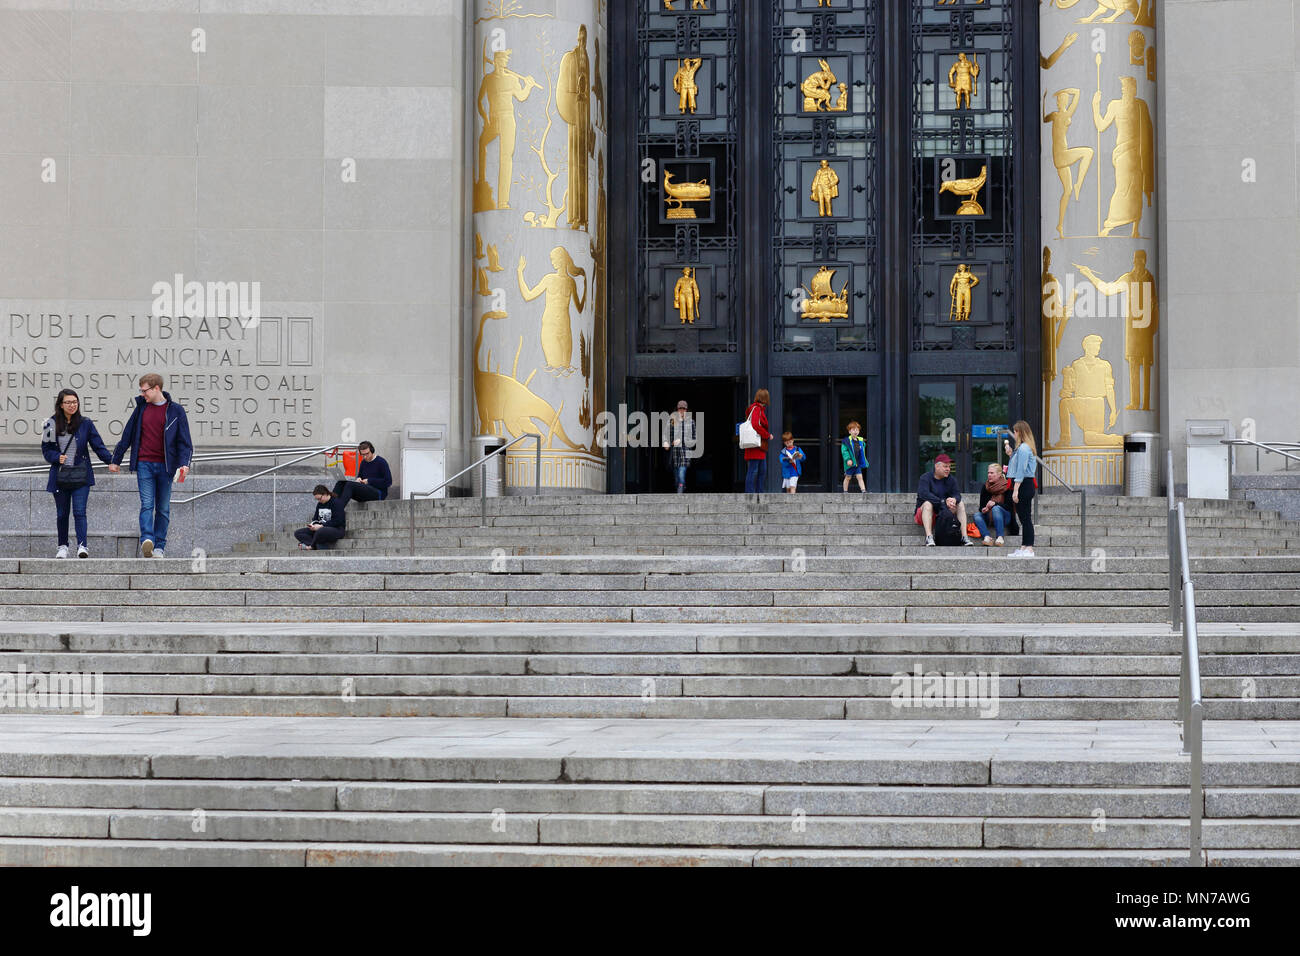 People on the stairs leading up to the Brooklyn Public Library, Central Library, 10 Grand Army Plaza, Brooklyn, NY. exterior. Stock Photo